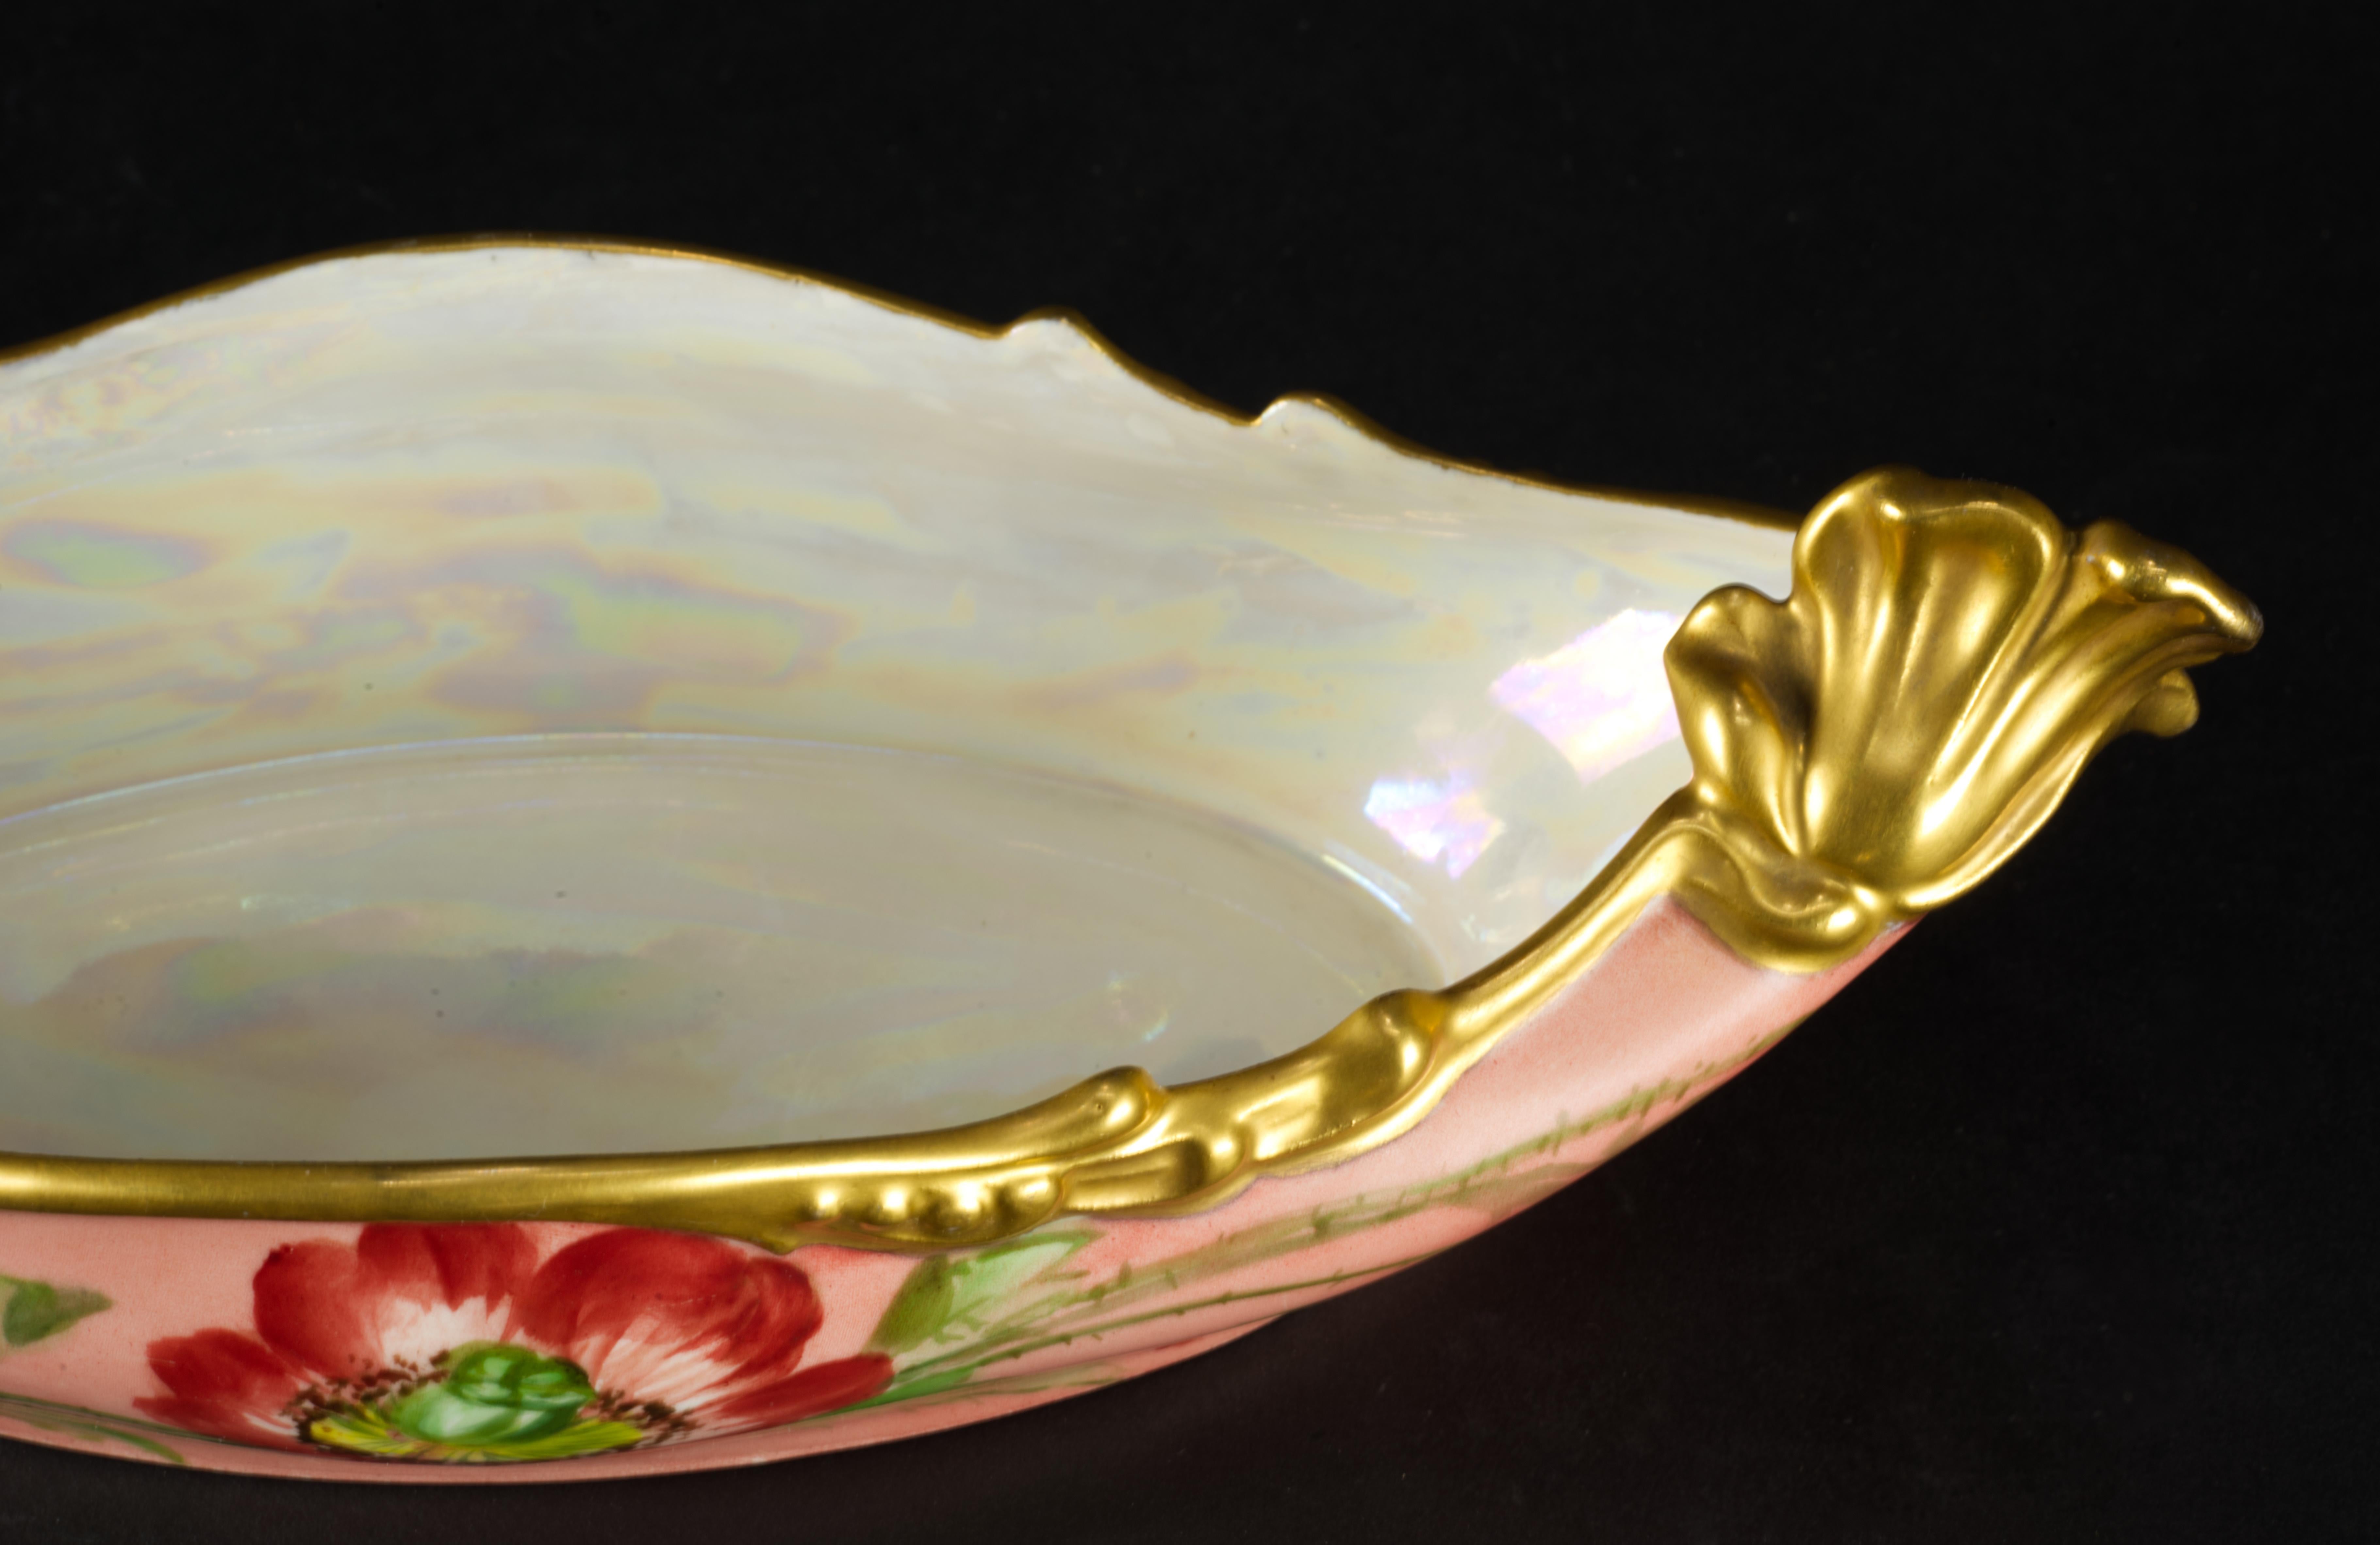 Rare Jean Pouyat Limoges France Oval Hand-painted Porcelain Ravier Bowl, 1926 For Sale 2